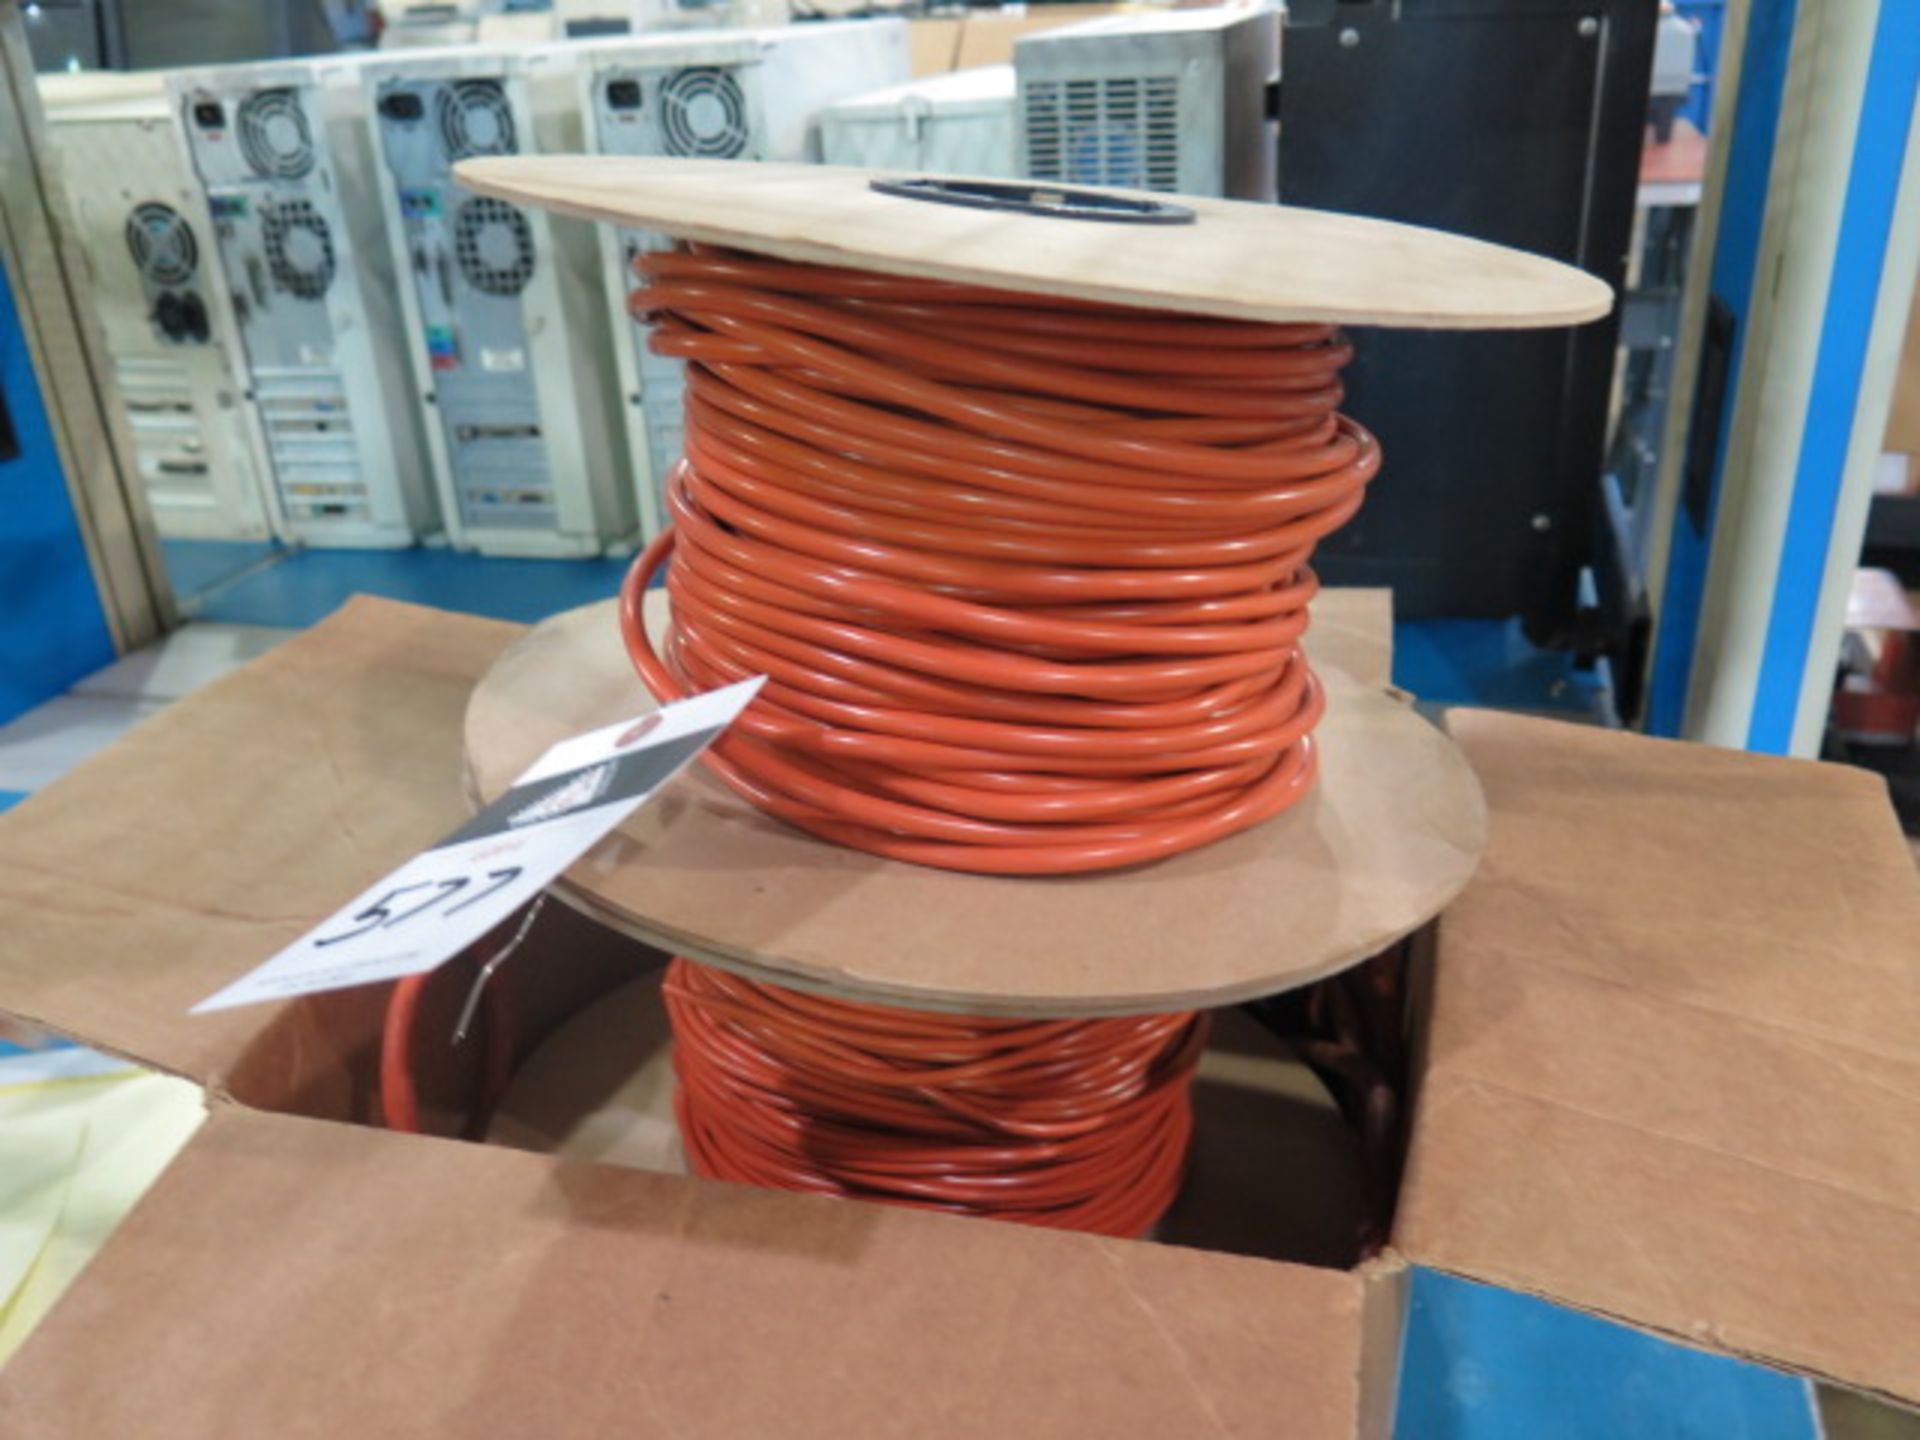 Rubber Gasket/Sealing Material (SOLD AS-IS - NO WARRANTY)